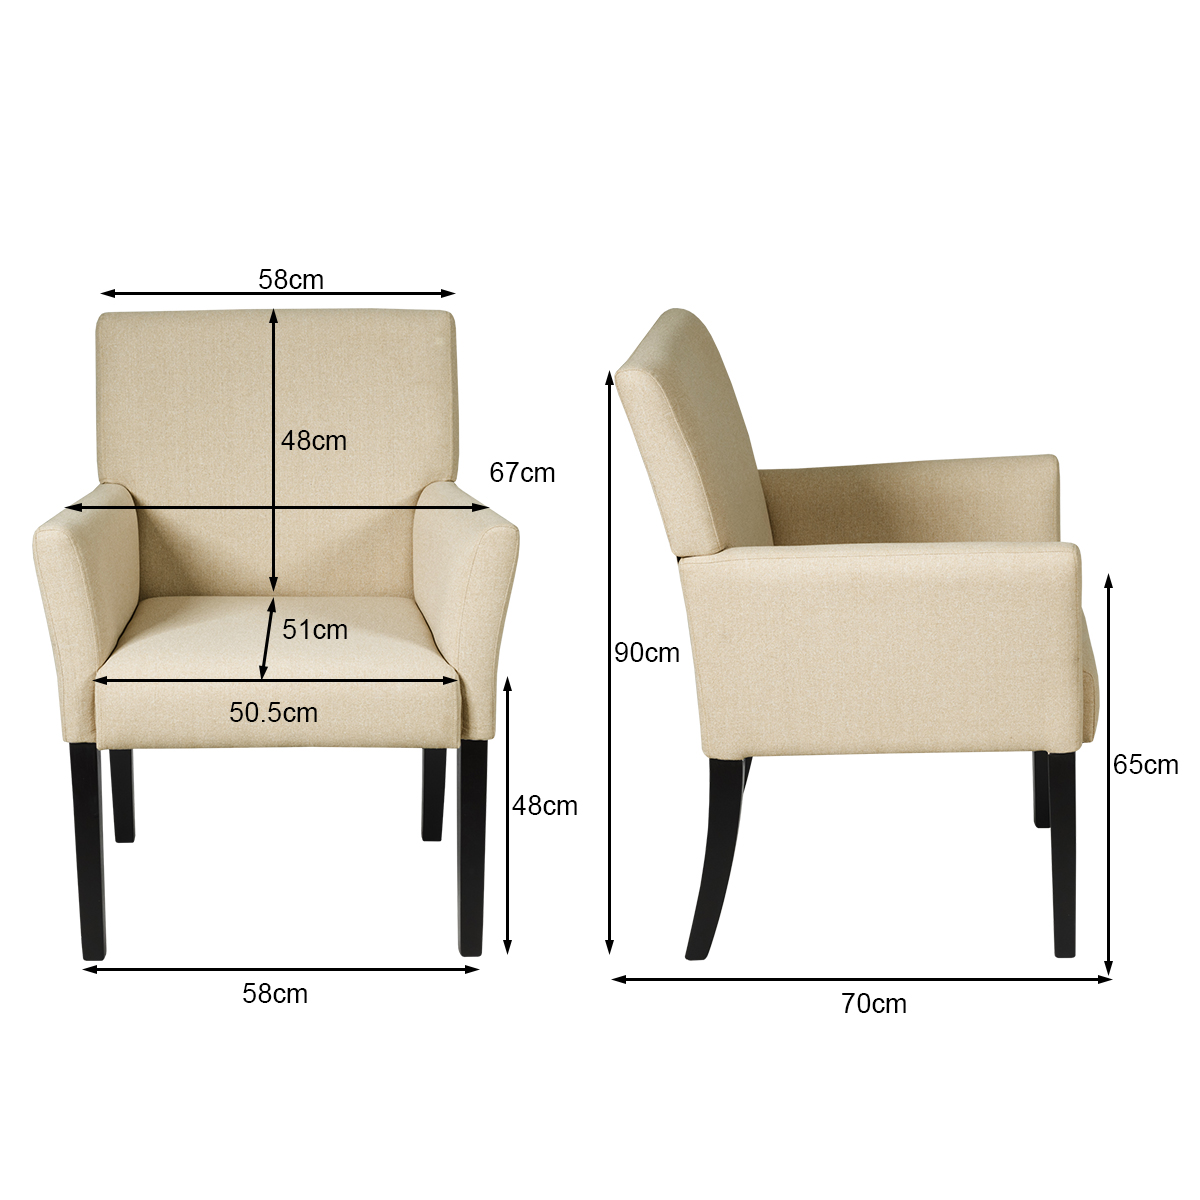 Executive_Guest_Chair_size-4.jpg